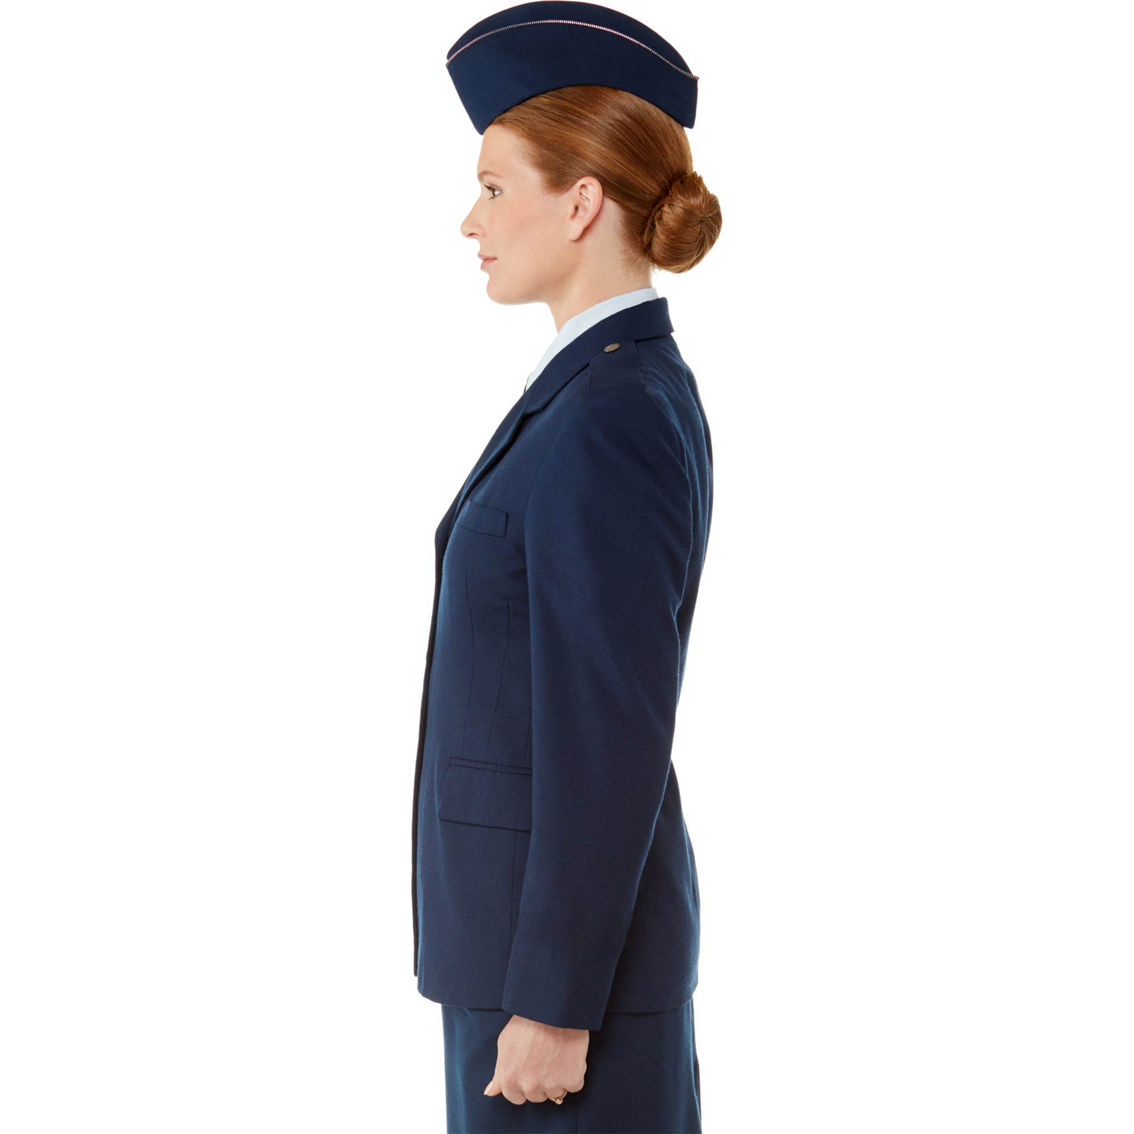 Air Force Women's Officer Service Dress Coat - Image 4 of 4